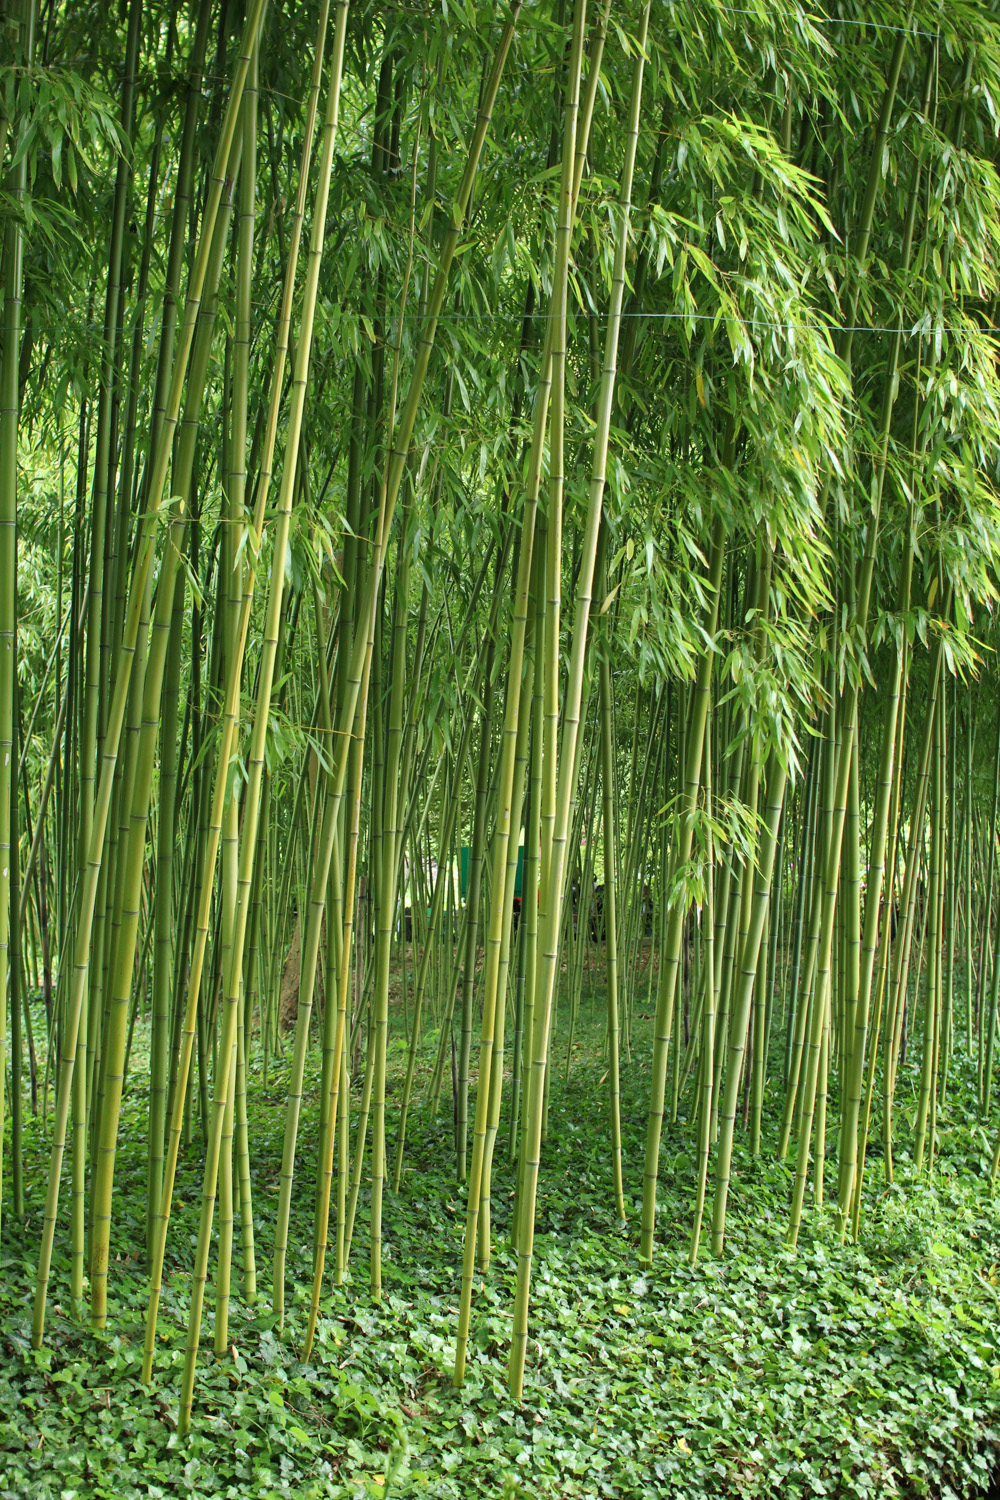 Bamboo in Monet's Garden, Giverny